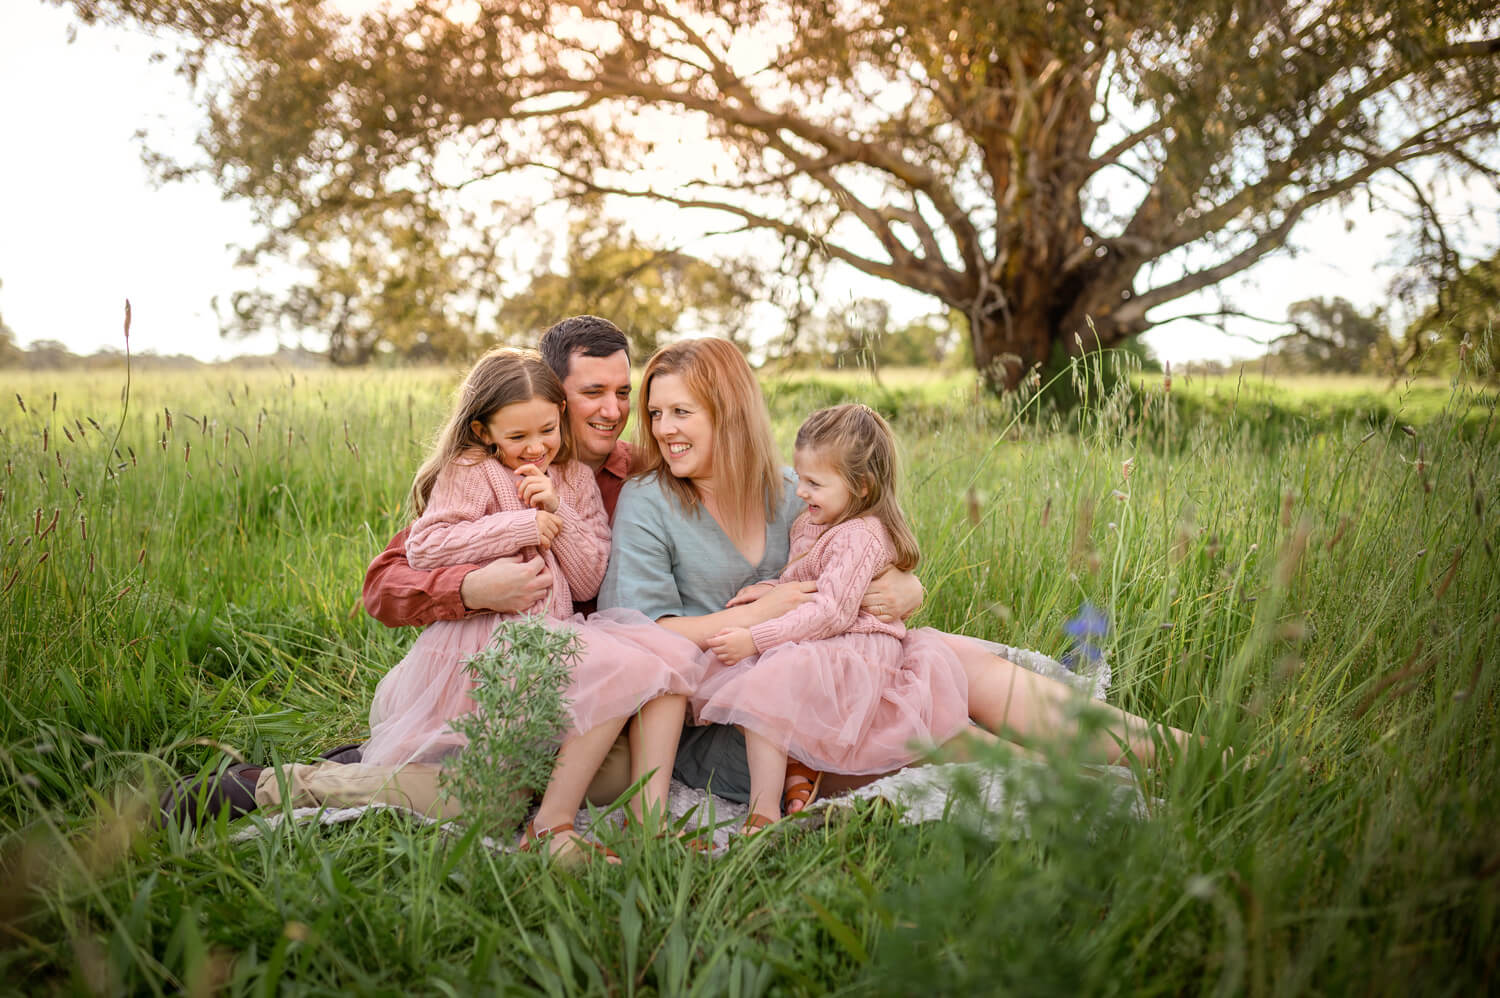 Perth family tickling each other during outdoor photo session at Lilac Hill, Guildford